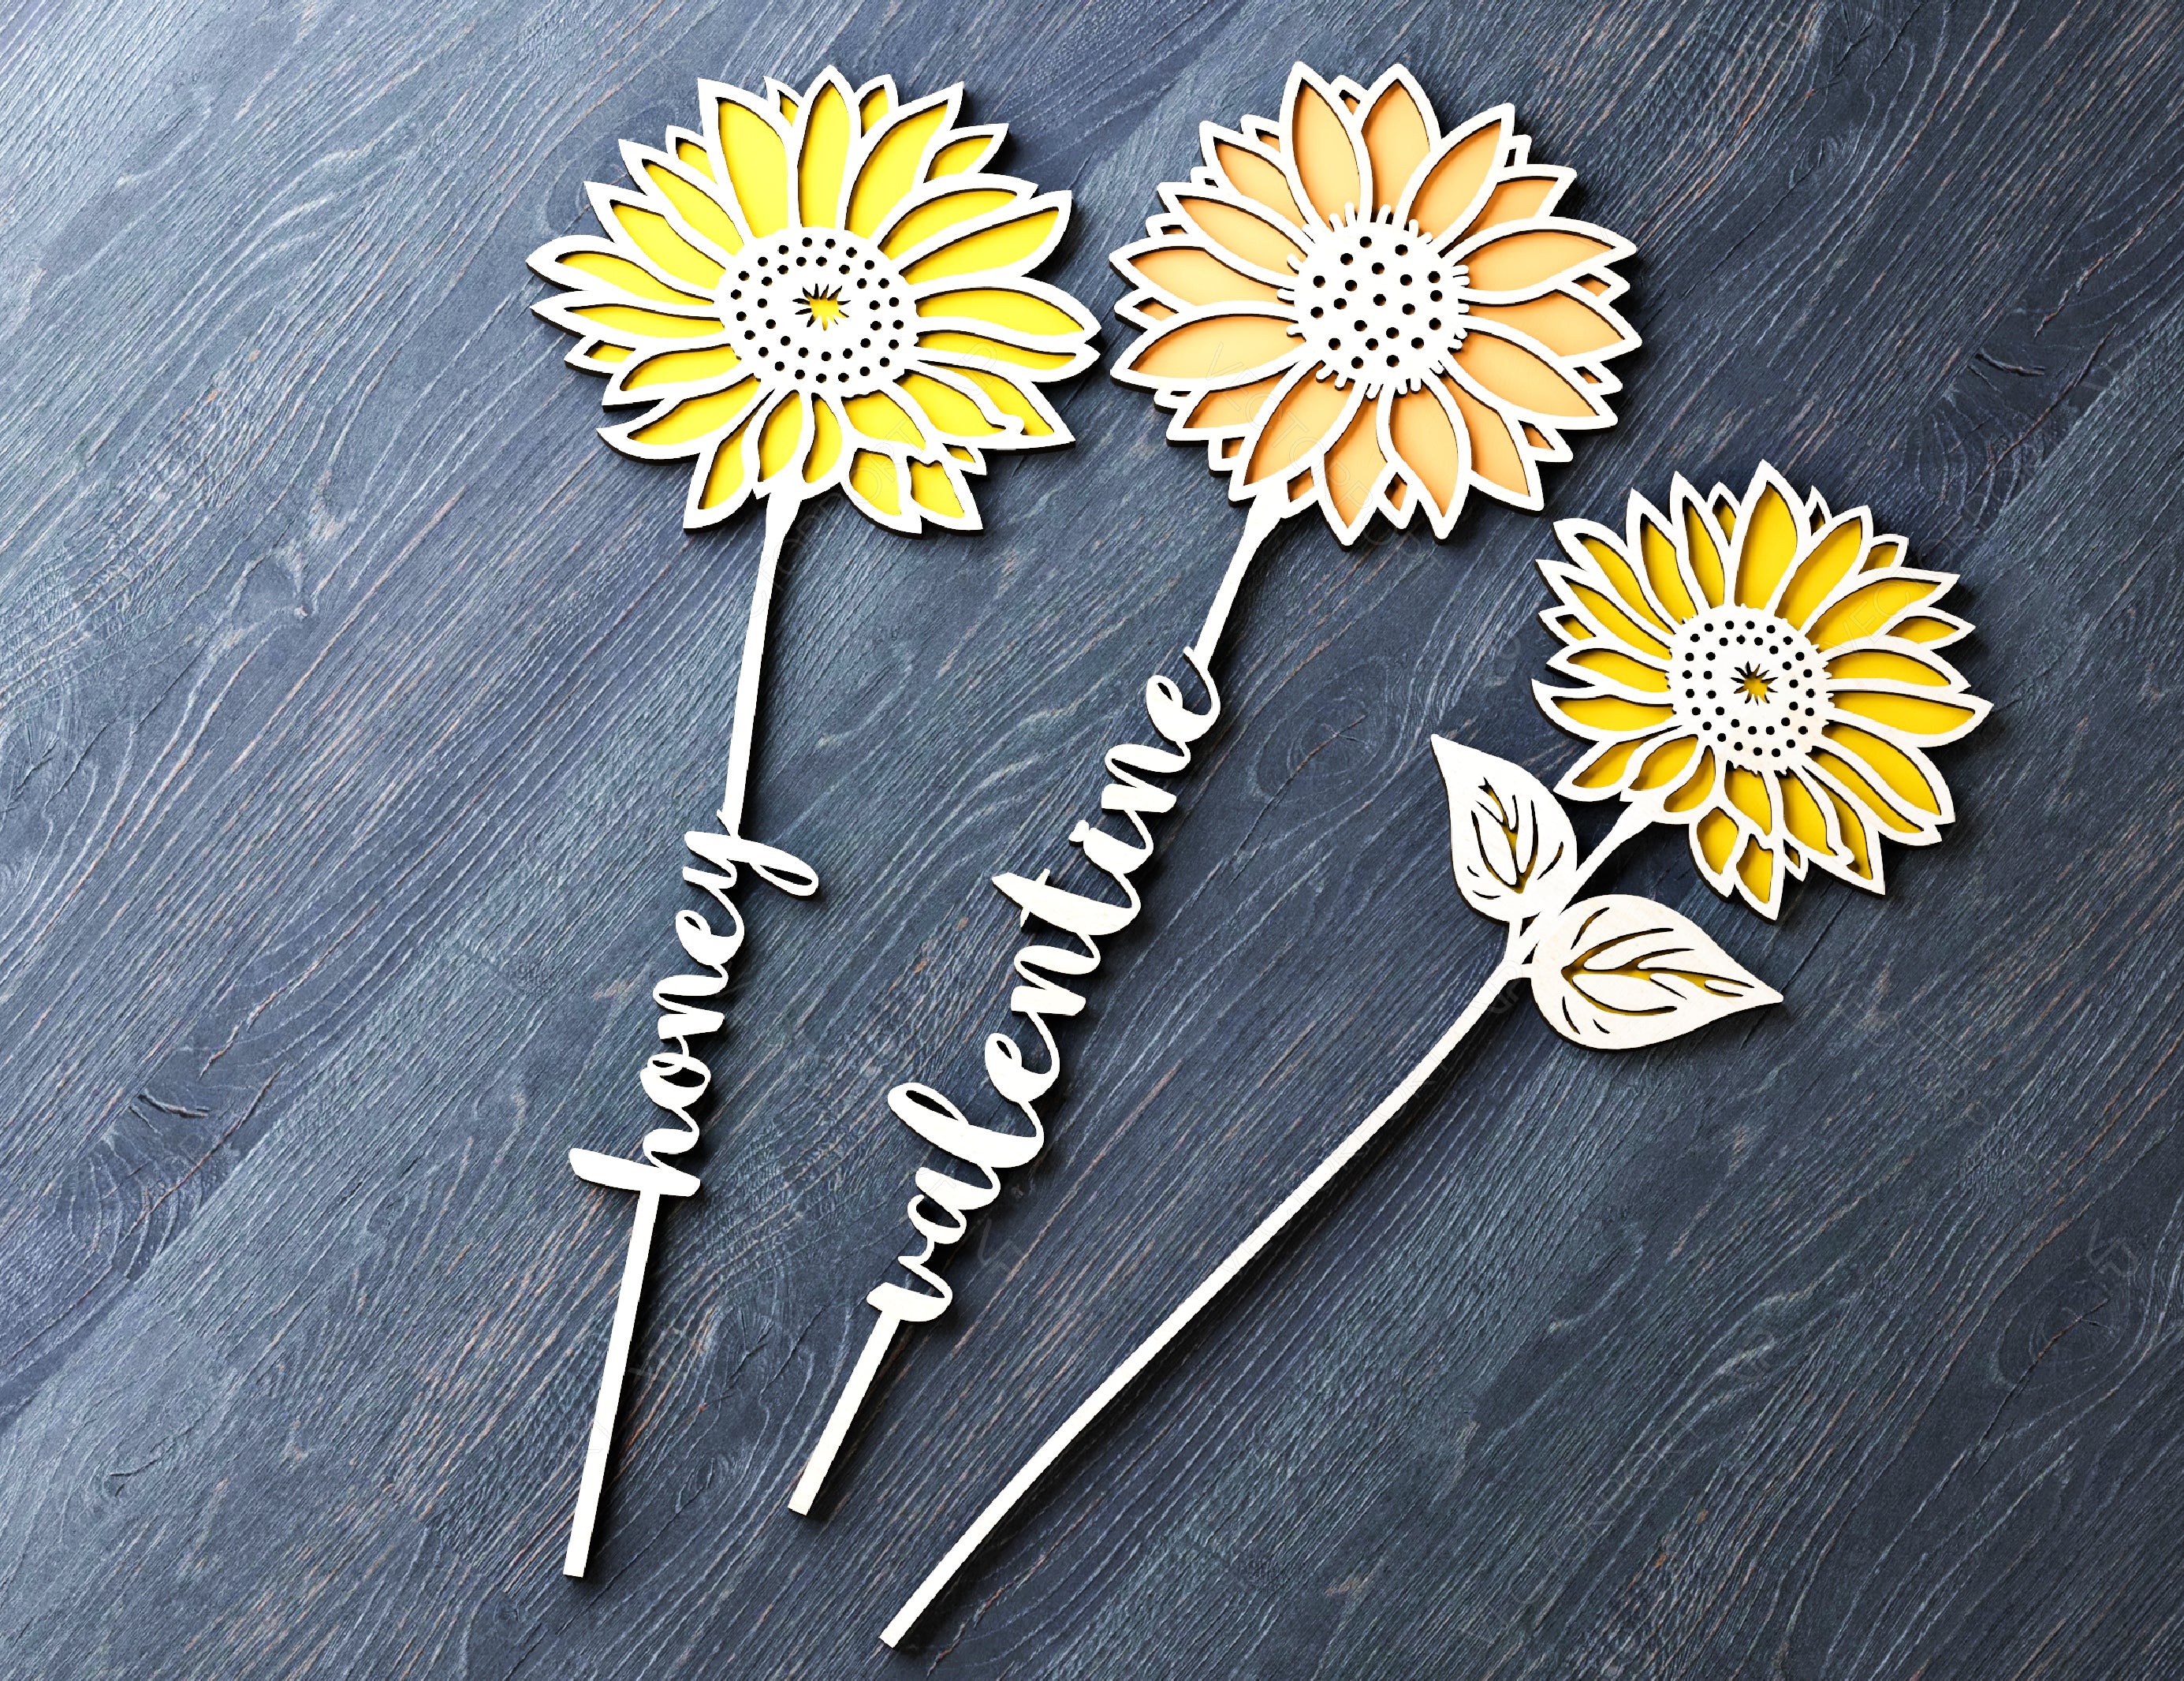 Sunflower Personalized Laser Cut Out stick with tag for laser cutting Art Valentine Day Flower with name editable Digital Download |#U180|